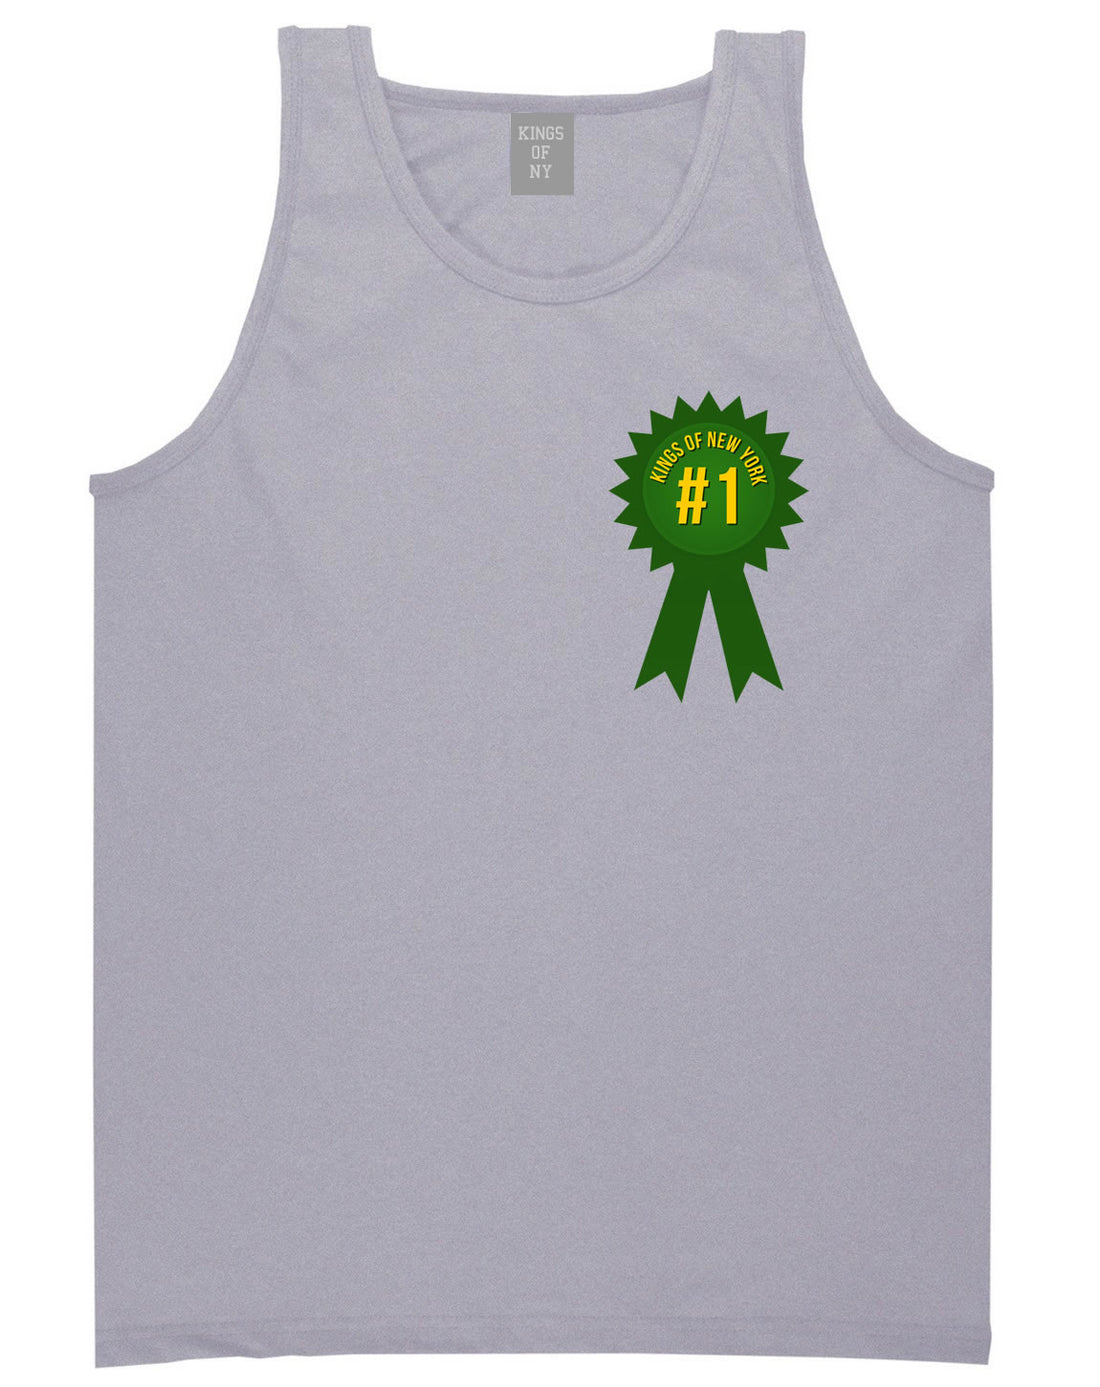 Grand Prize Champions Tank Top in Grey